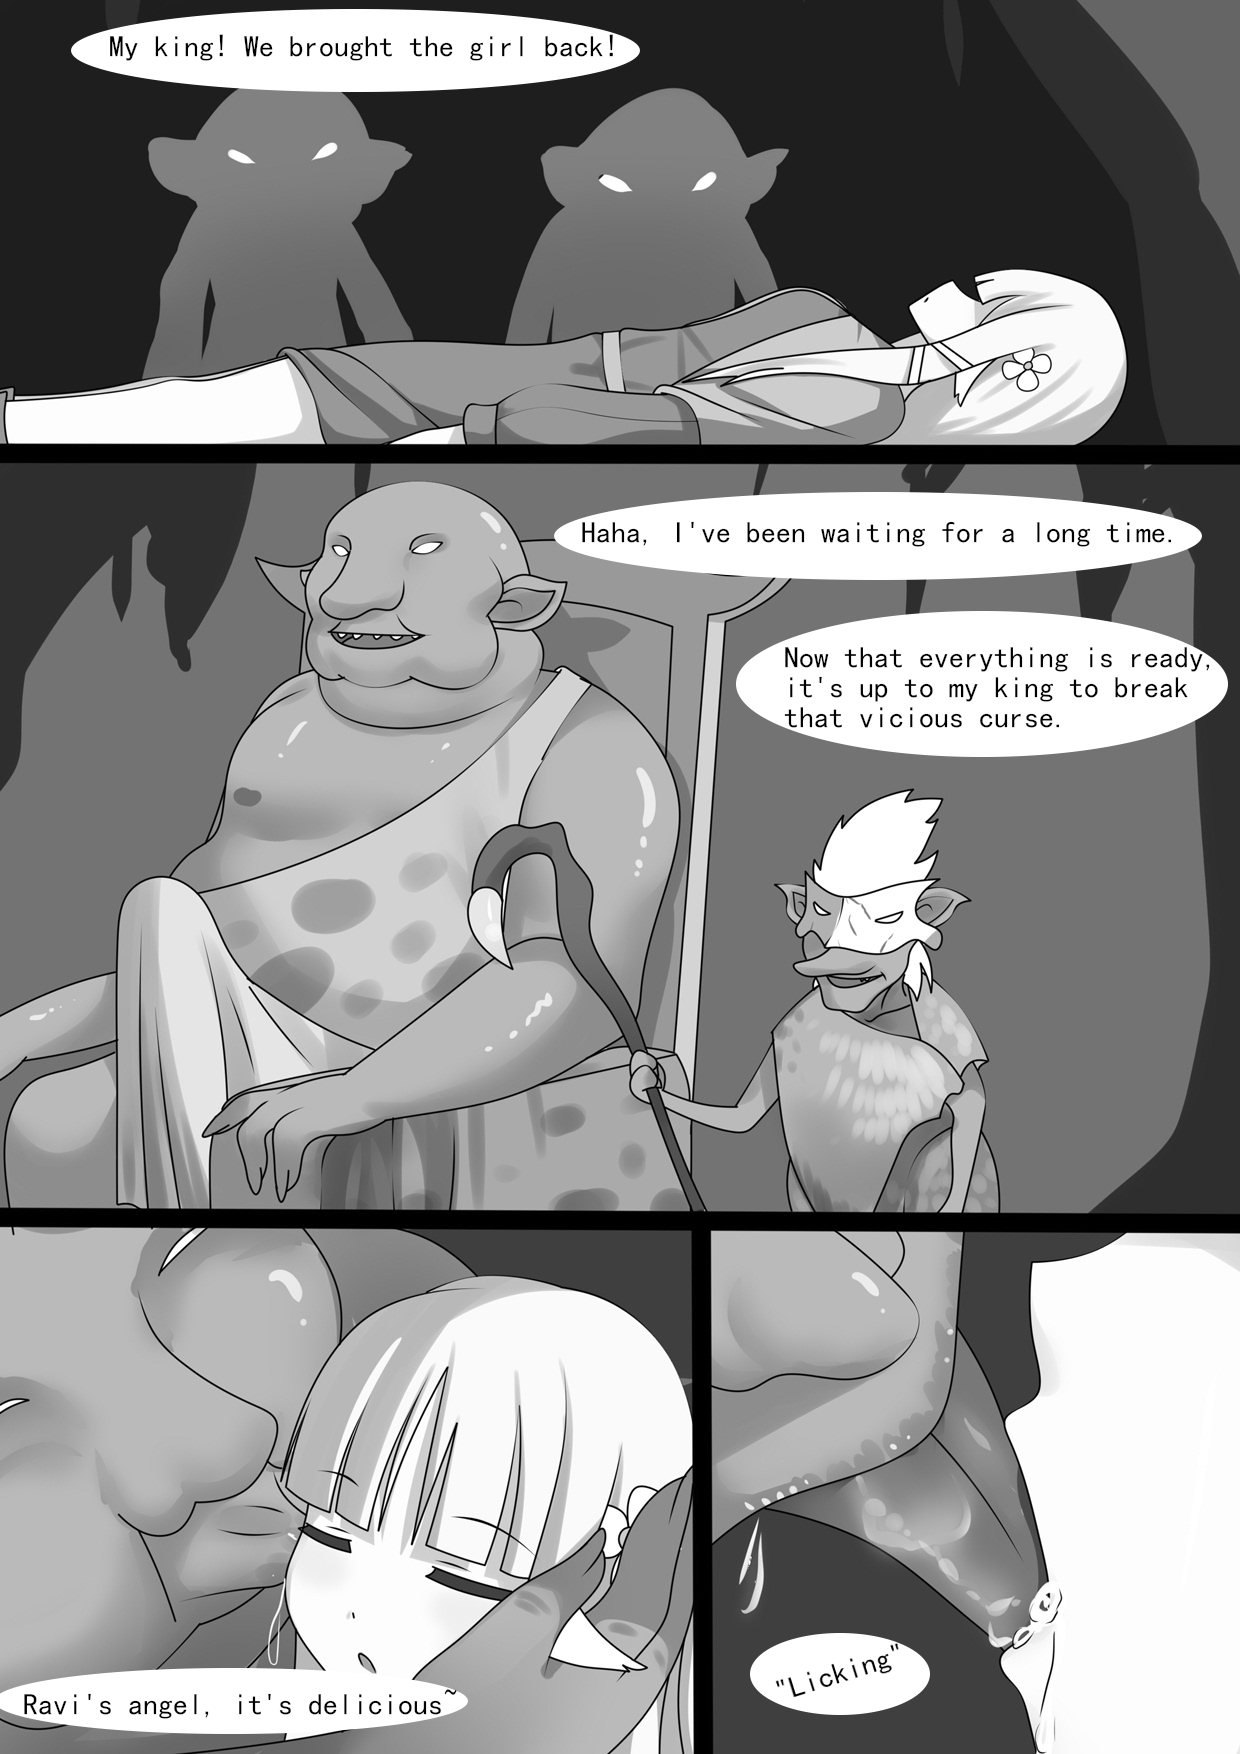 [WhitePH] Counterattack of Orcs 1 [English] page 7 full